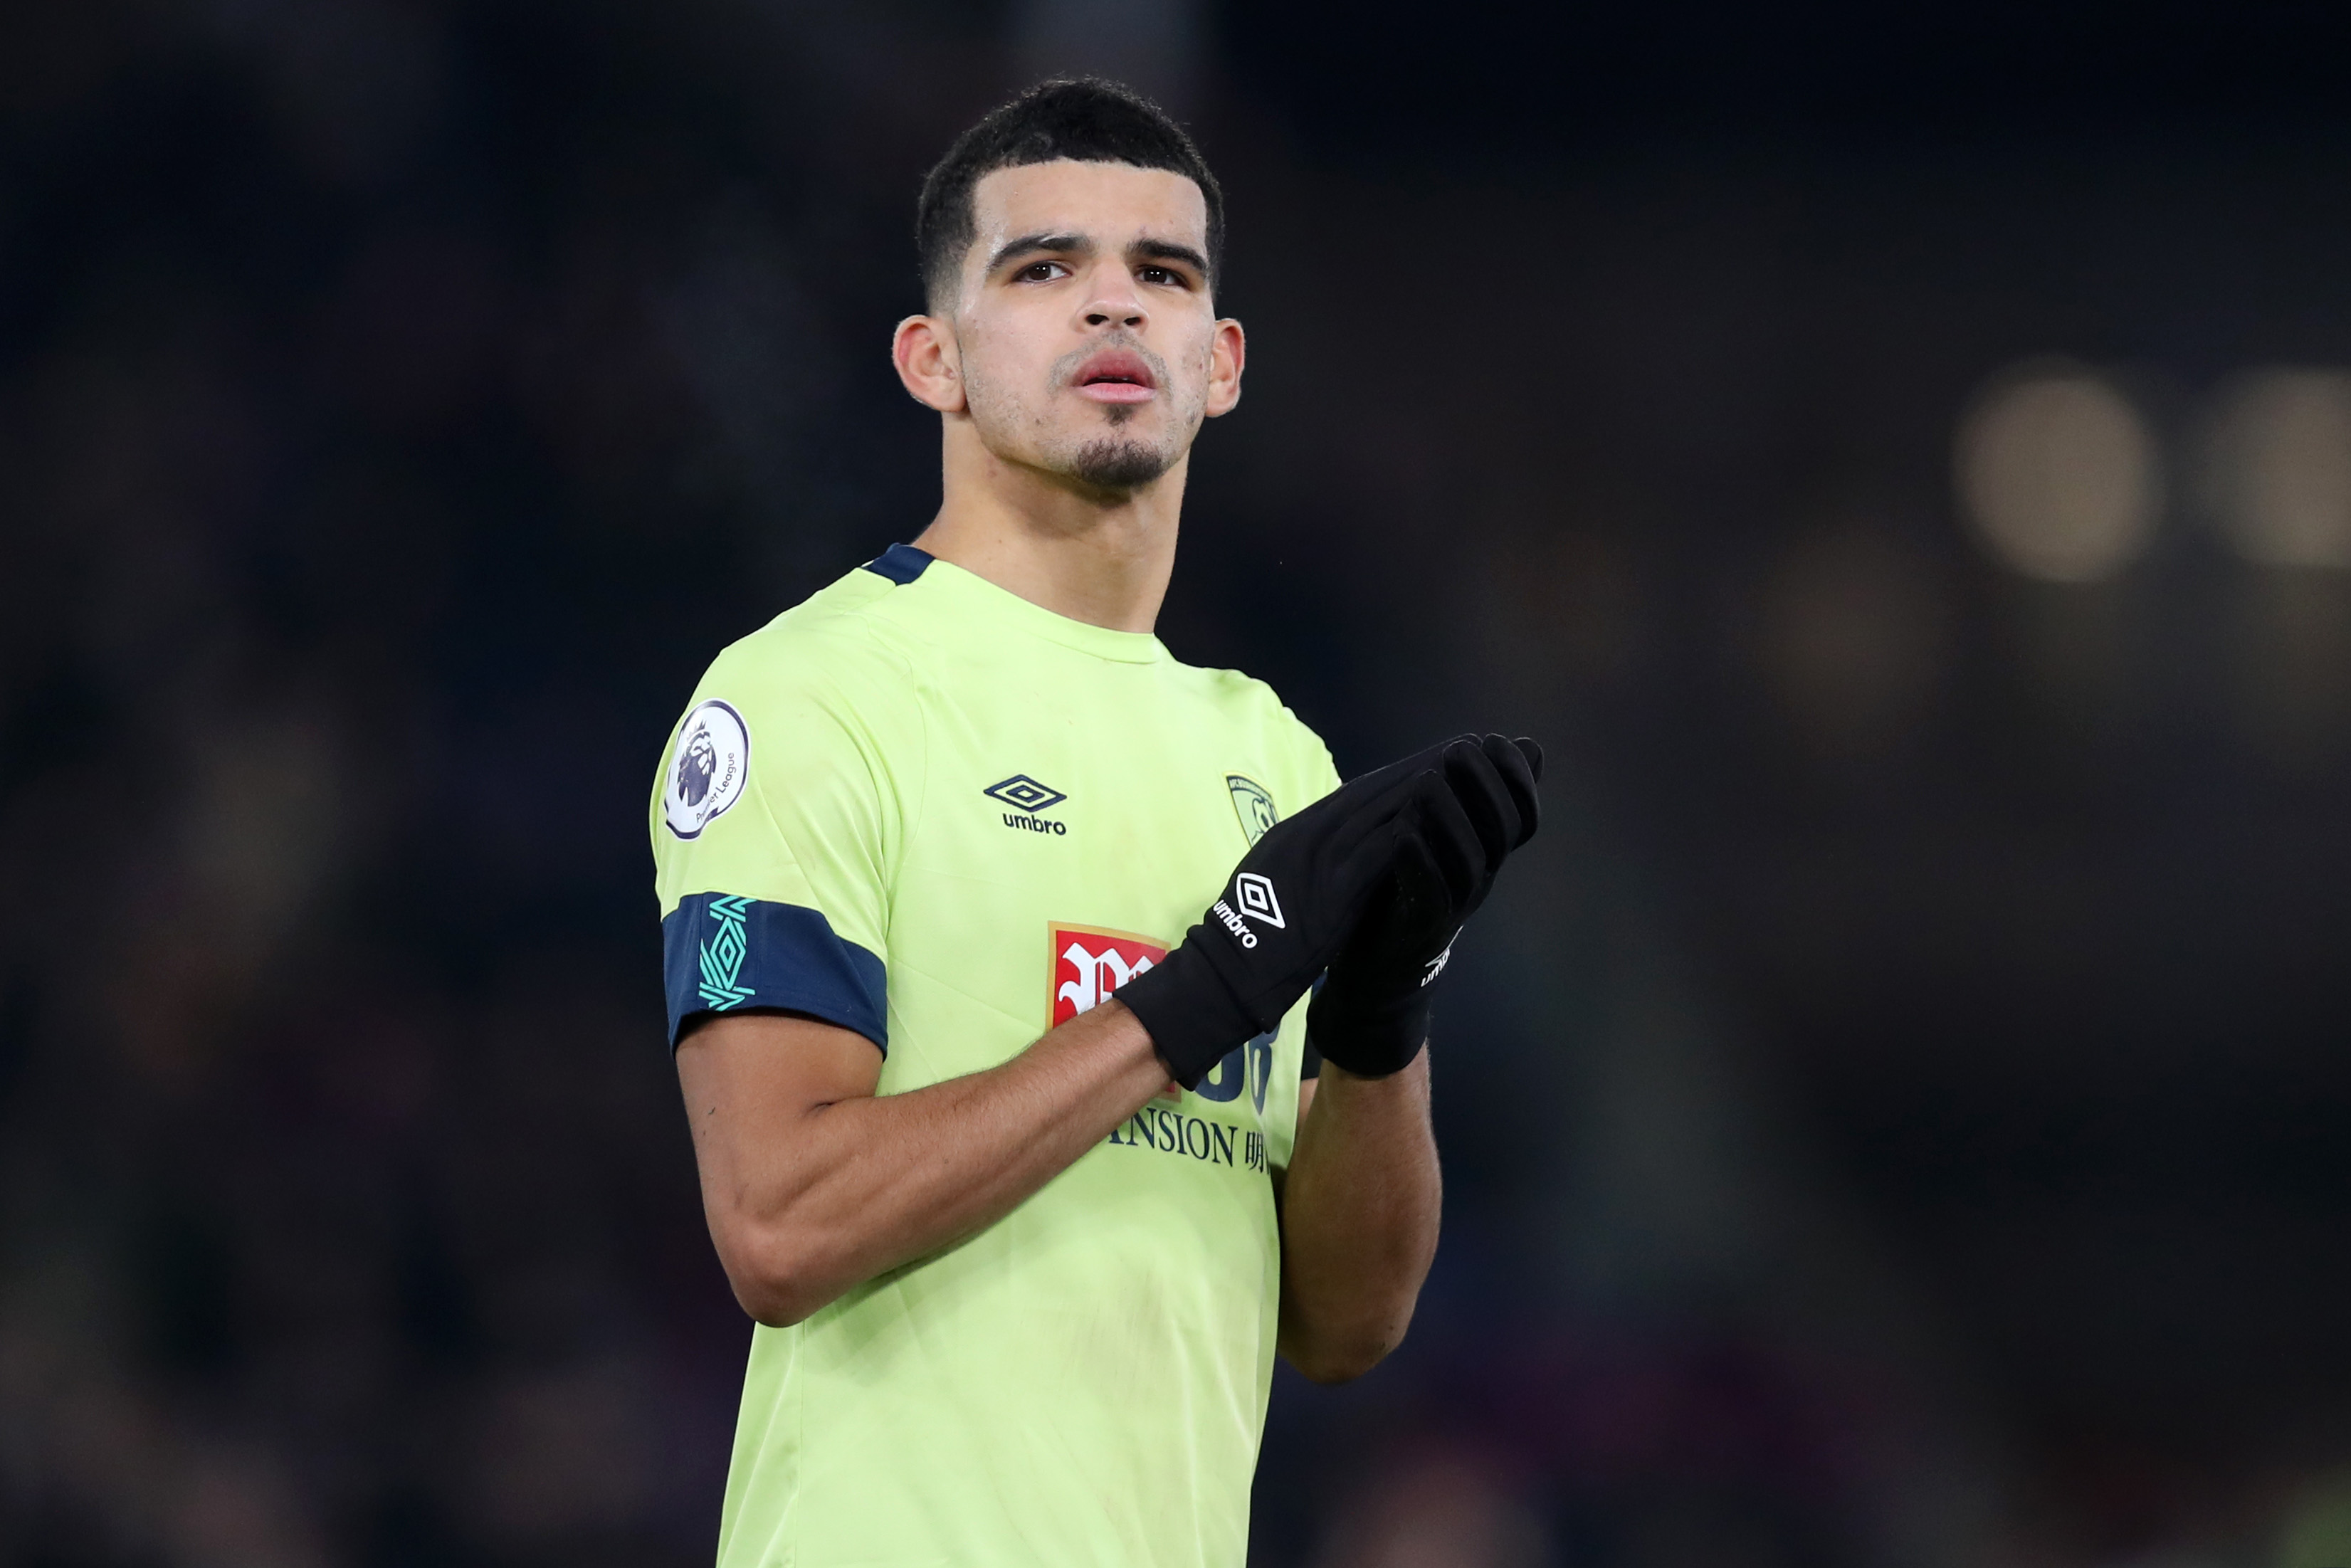 Solanke will be looking to break his duck for Bournemouth when he returns to Stamford Bridge (Photo by Jack Thomas/Getty Images)